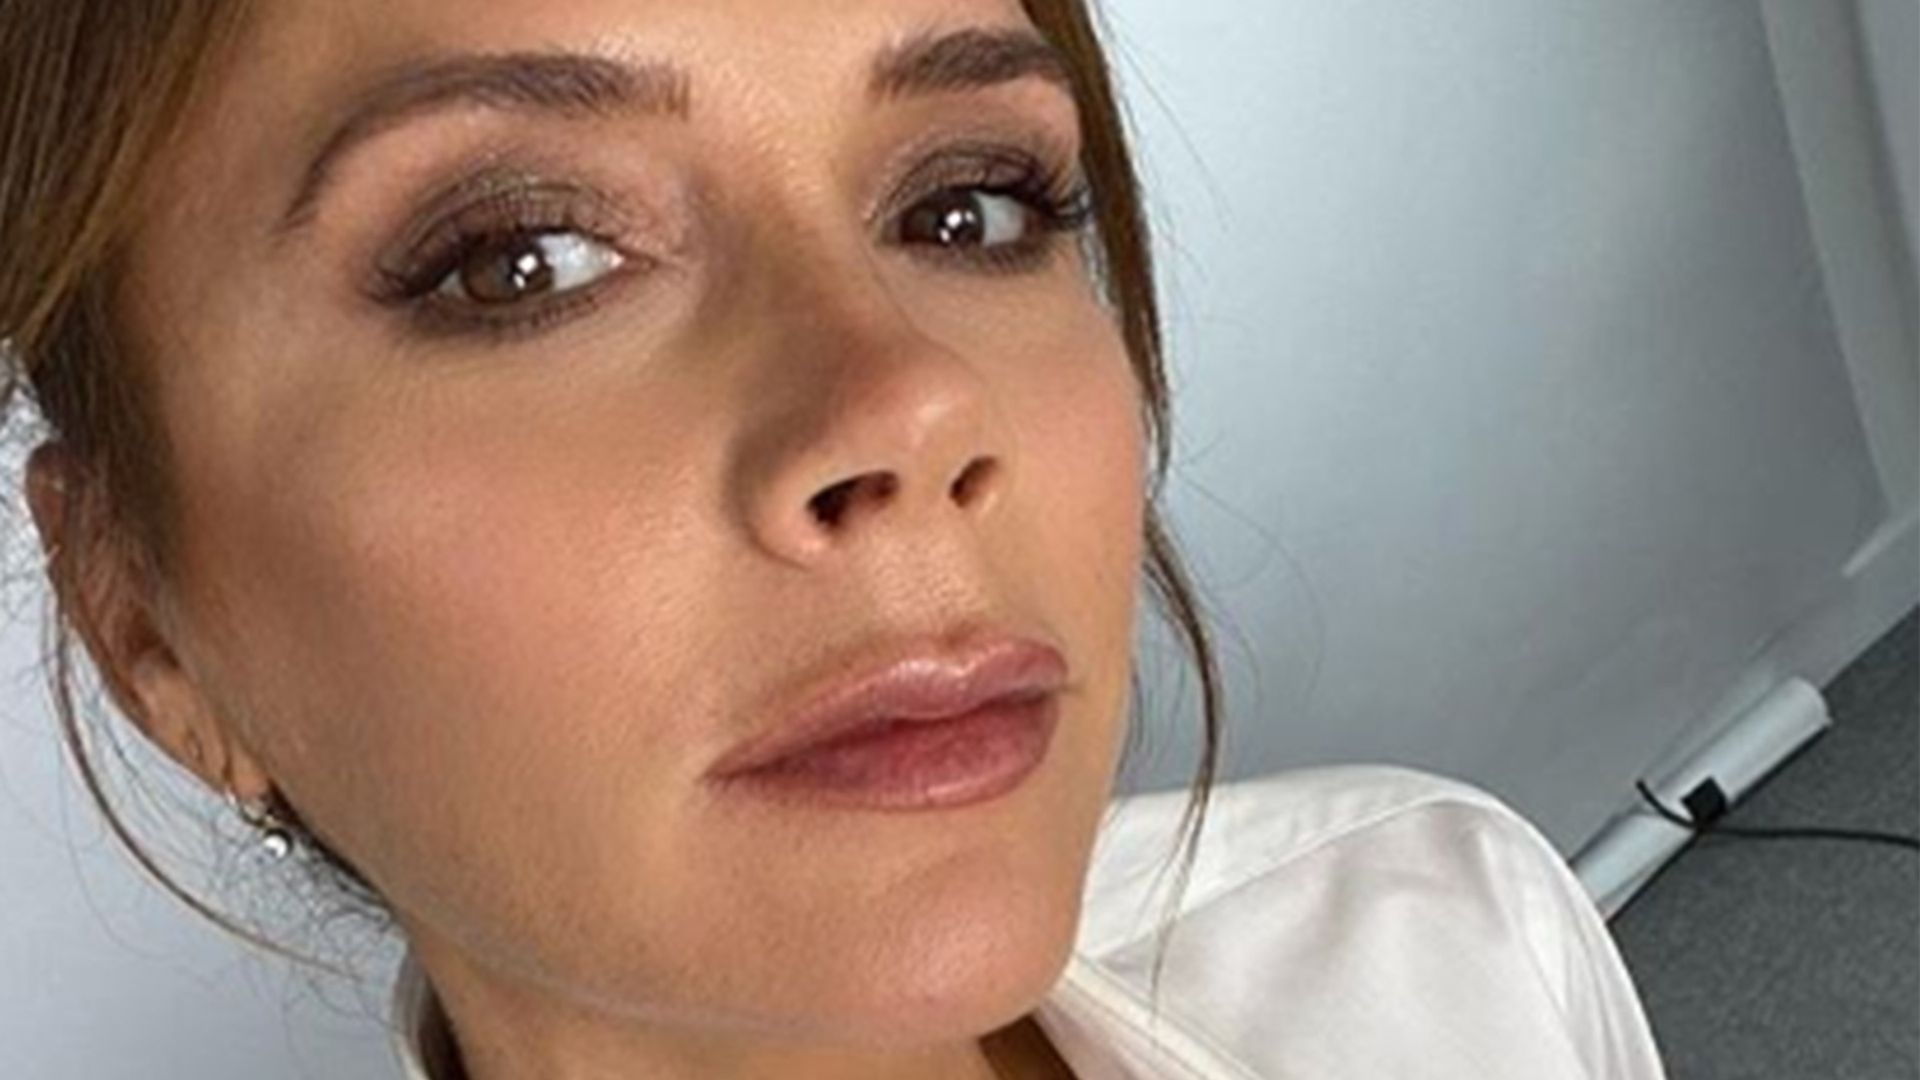 Victoria Beckham just broke a MAJOR fashion rule - but fans are delighted